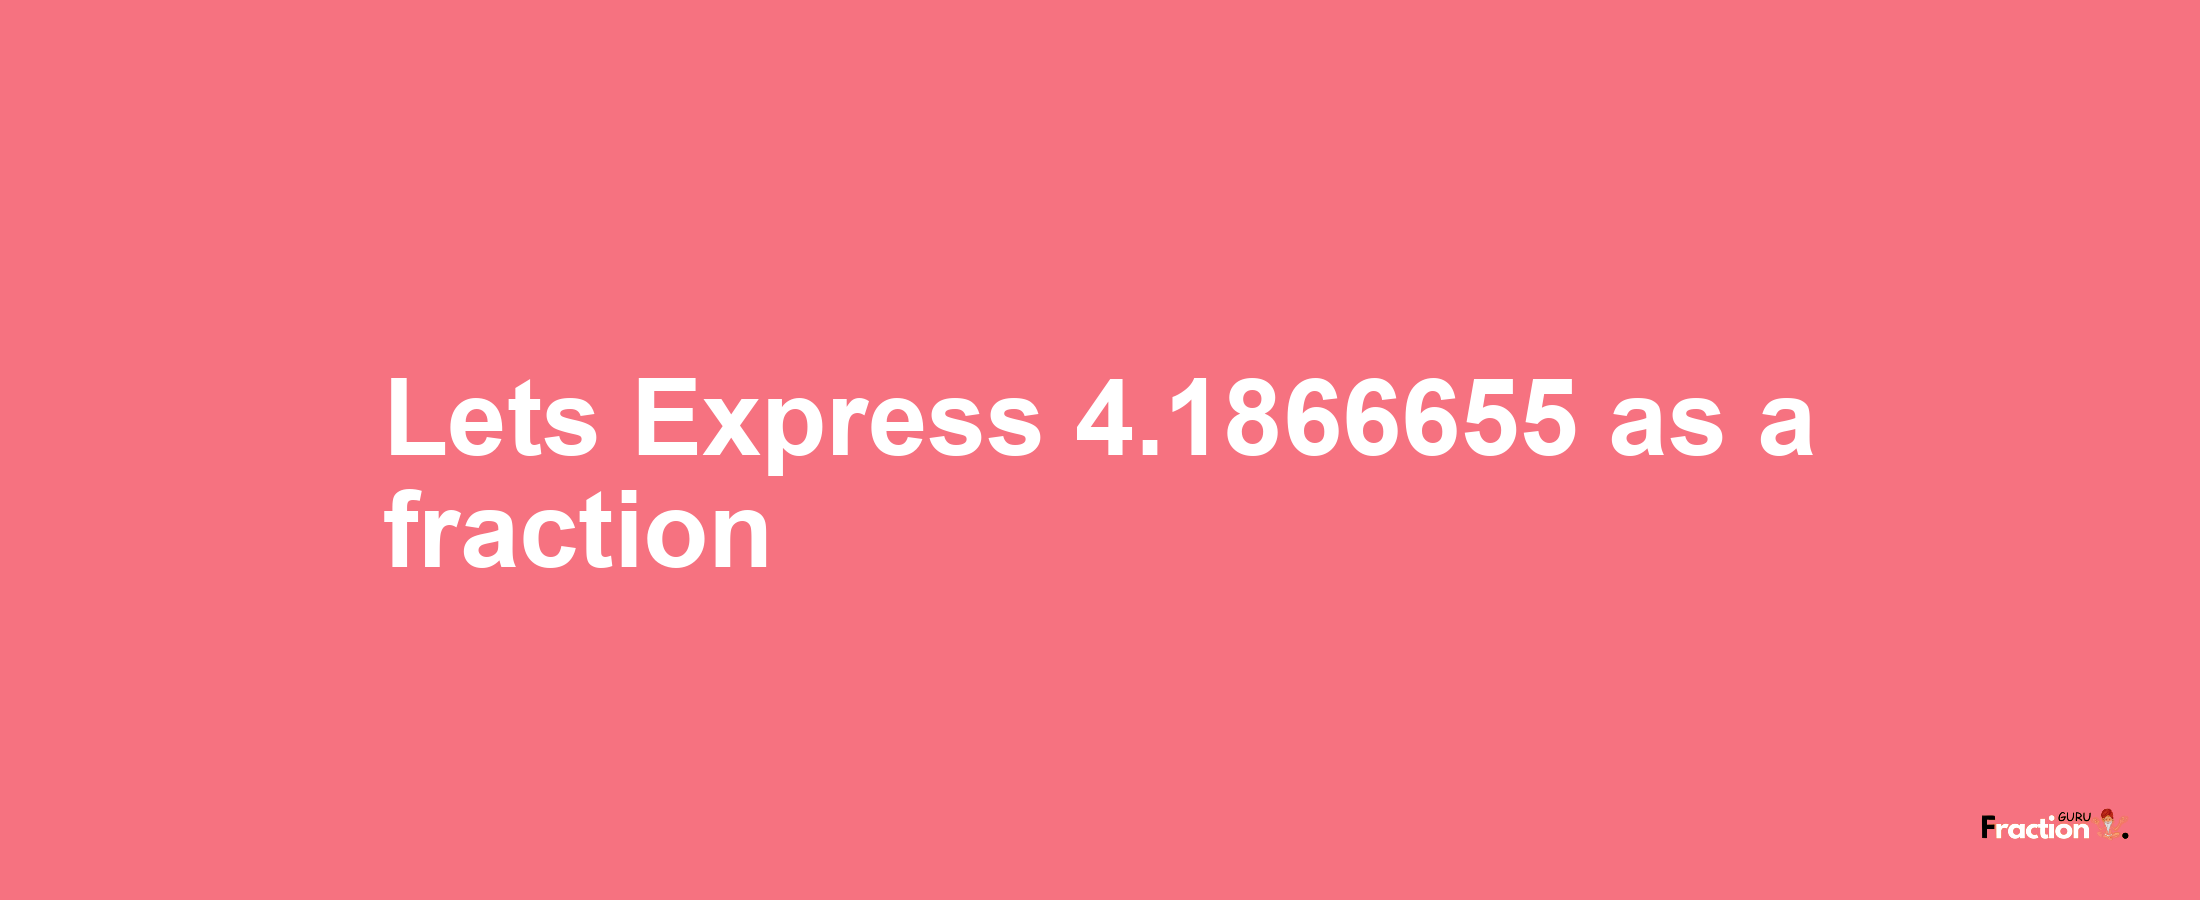 Lets Express 4.1866655 as afraction